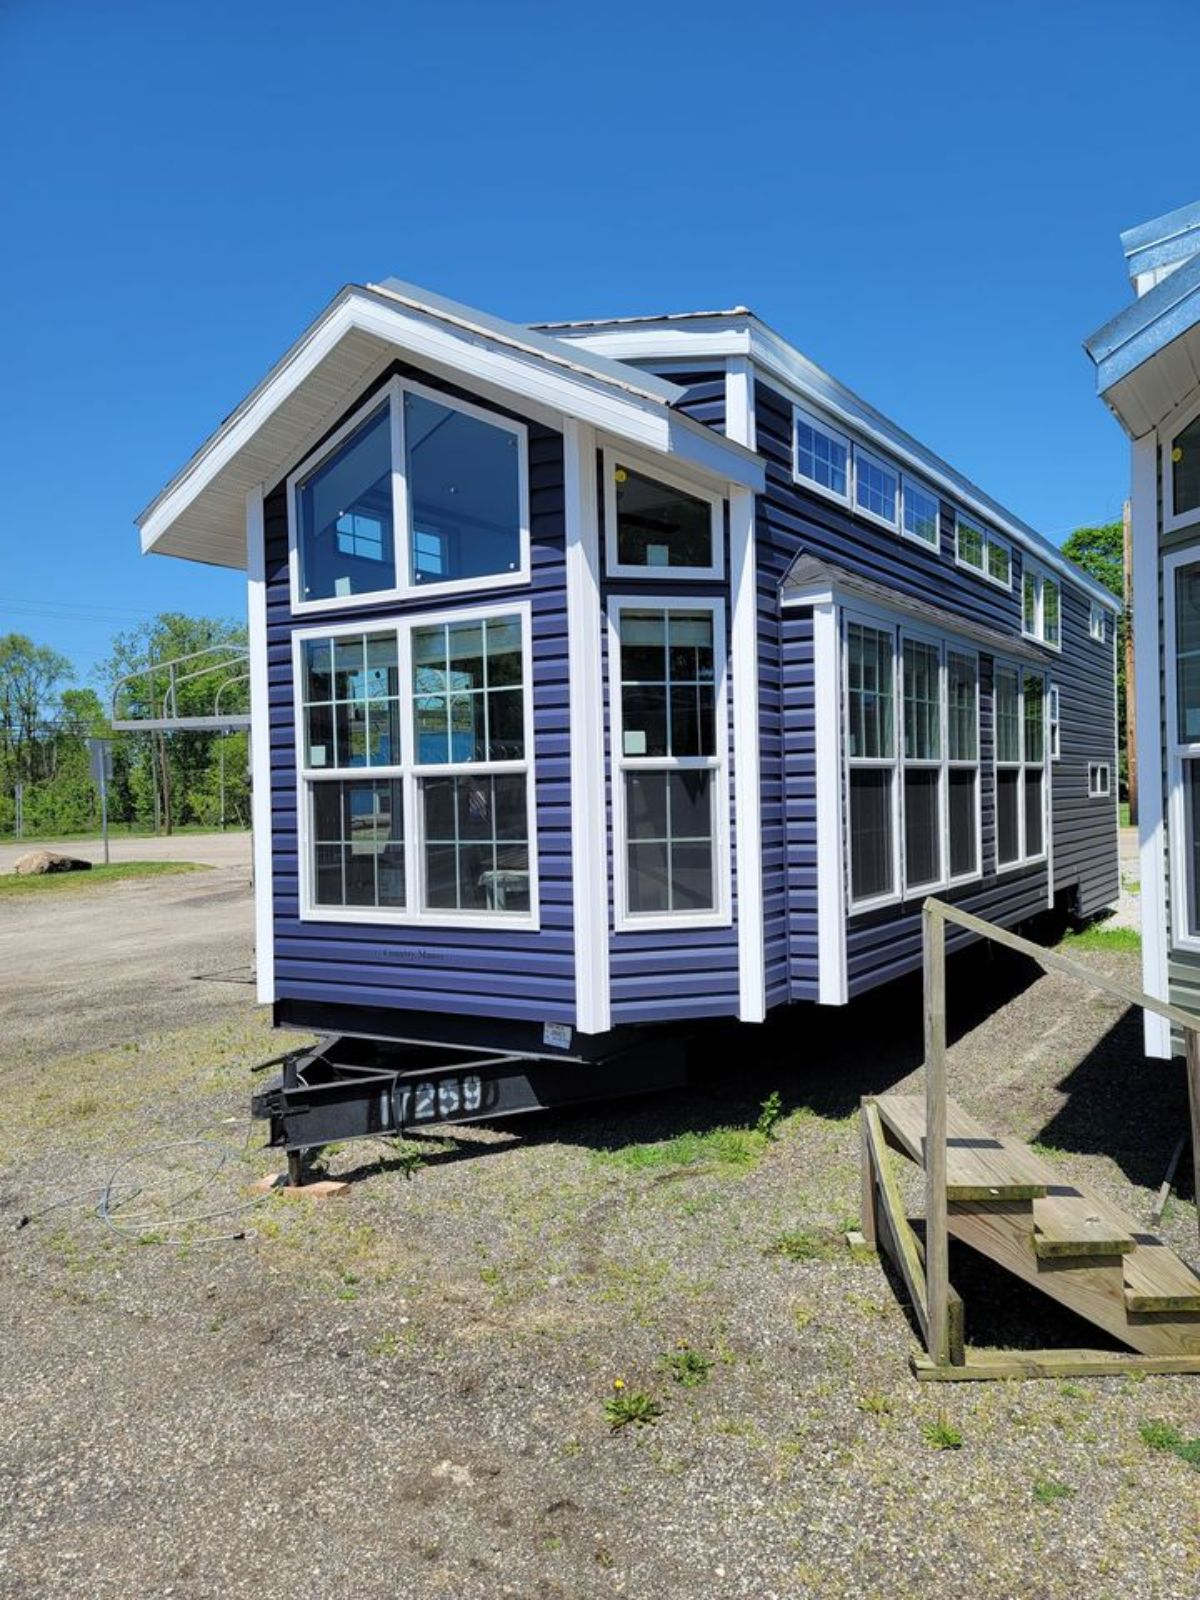 Stunning blue exterior of 2022 Park Model Tiny Home from outside